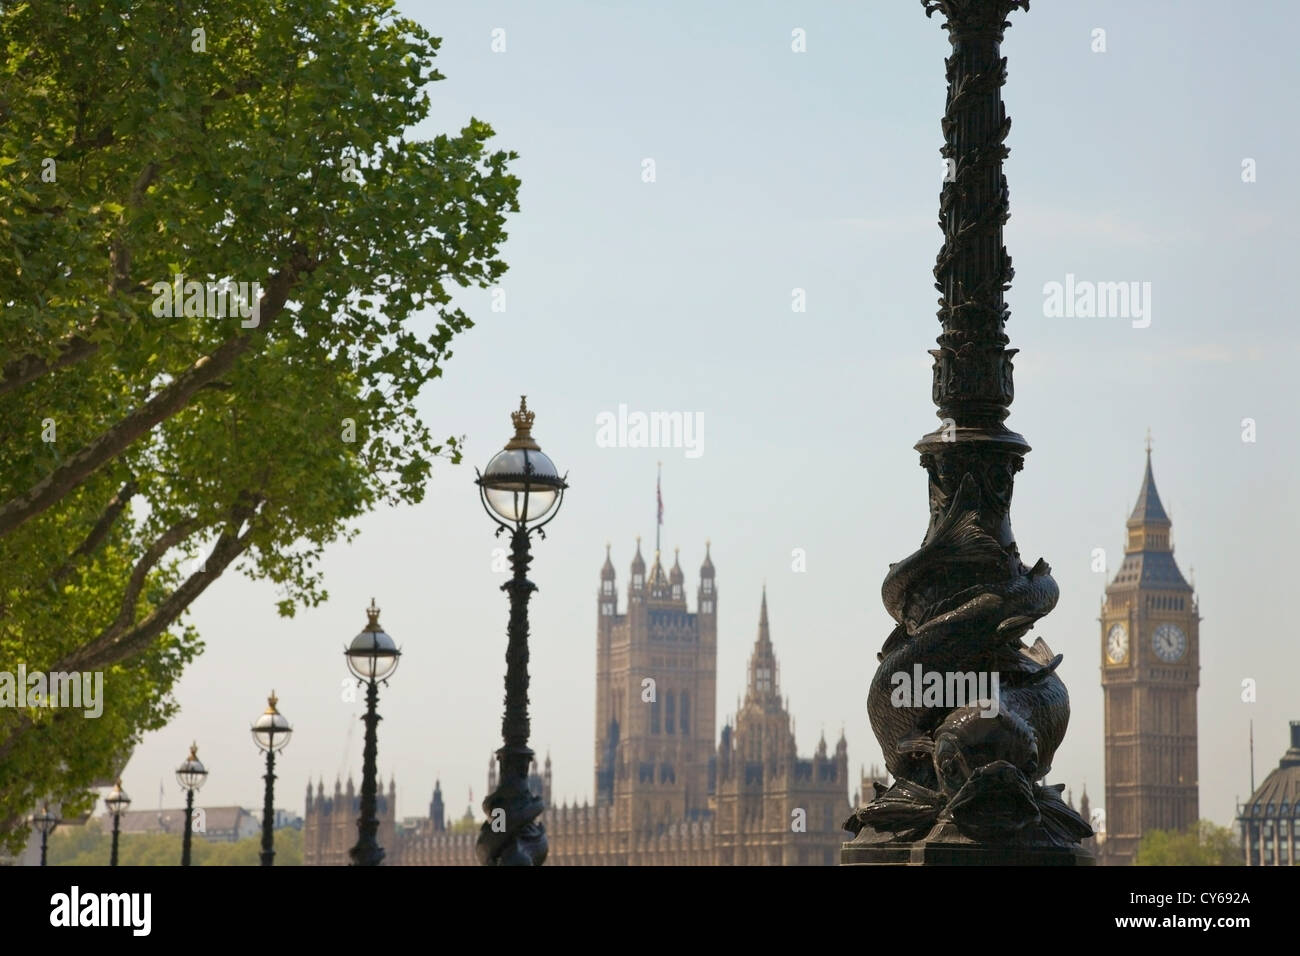 A line of ornate street lamps framing a view of Big Ben and the Houses of Parliament, London, UK. Stock Photo